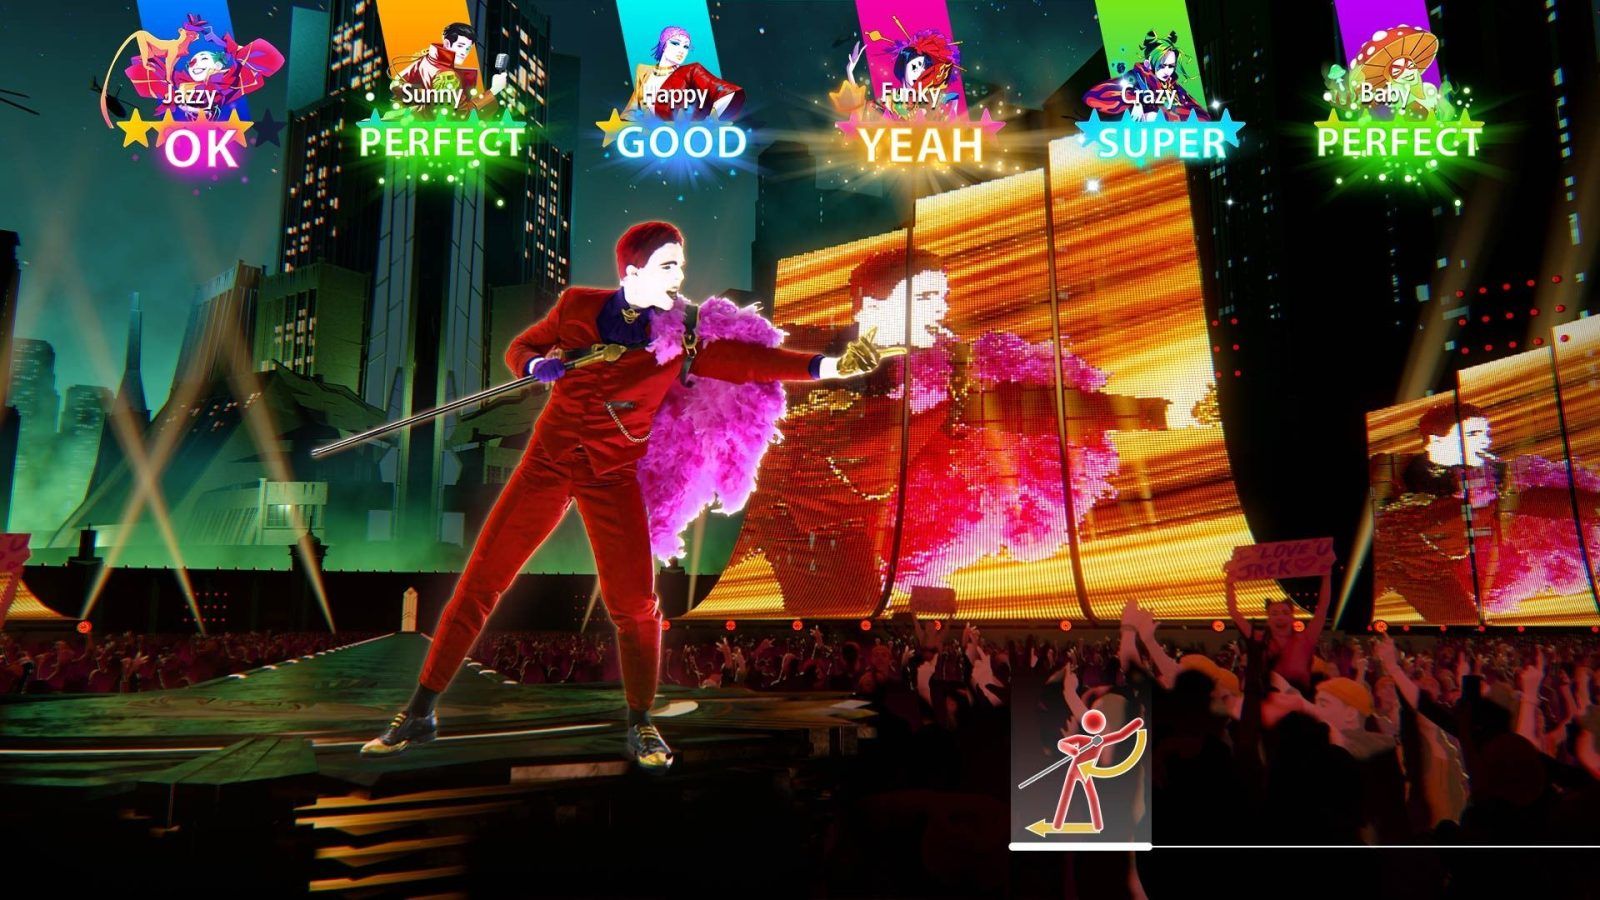 Nine new songs have been revealed for Just Dance 2021